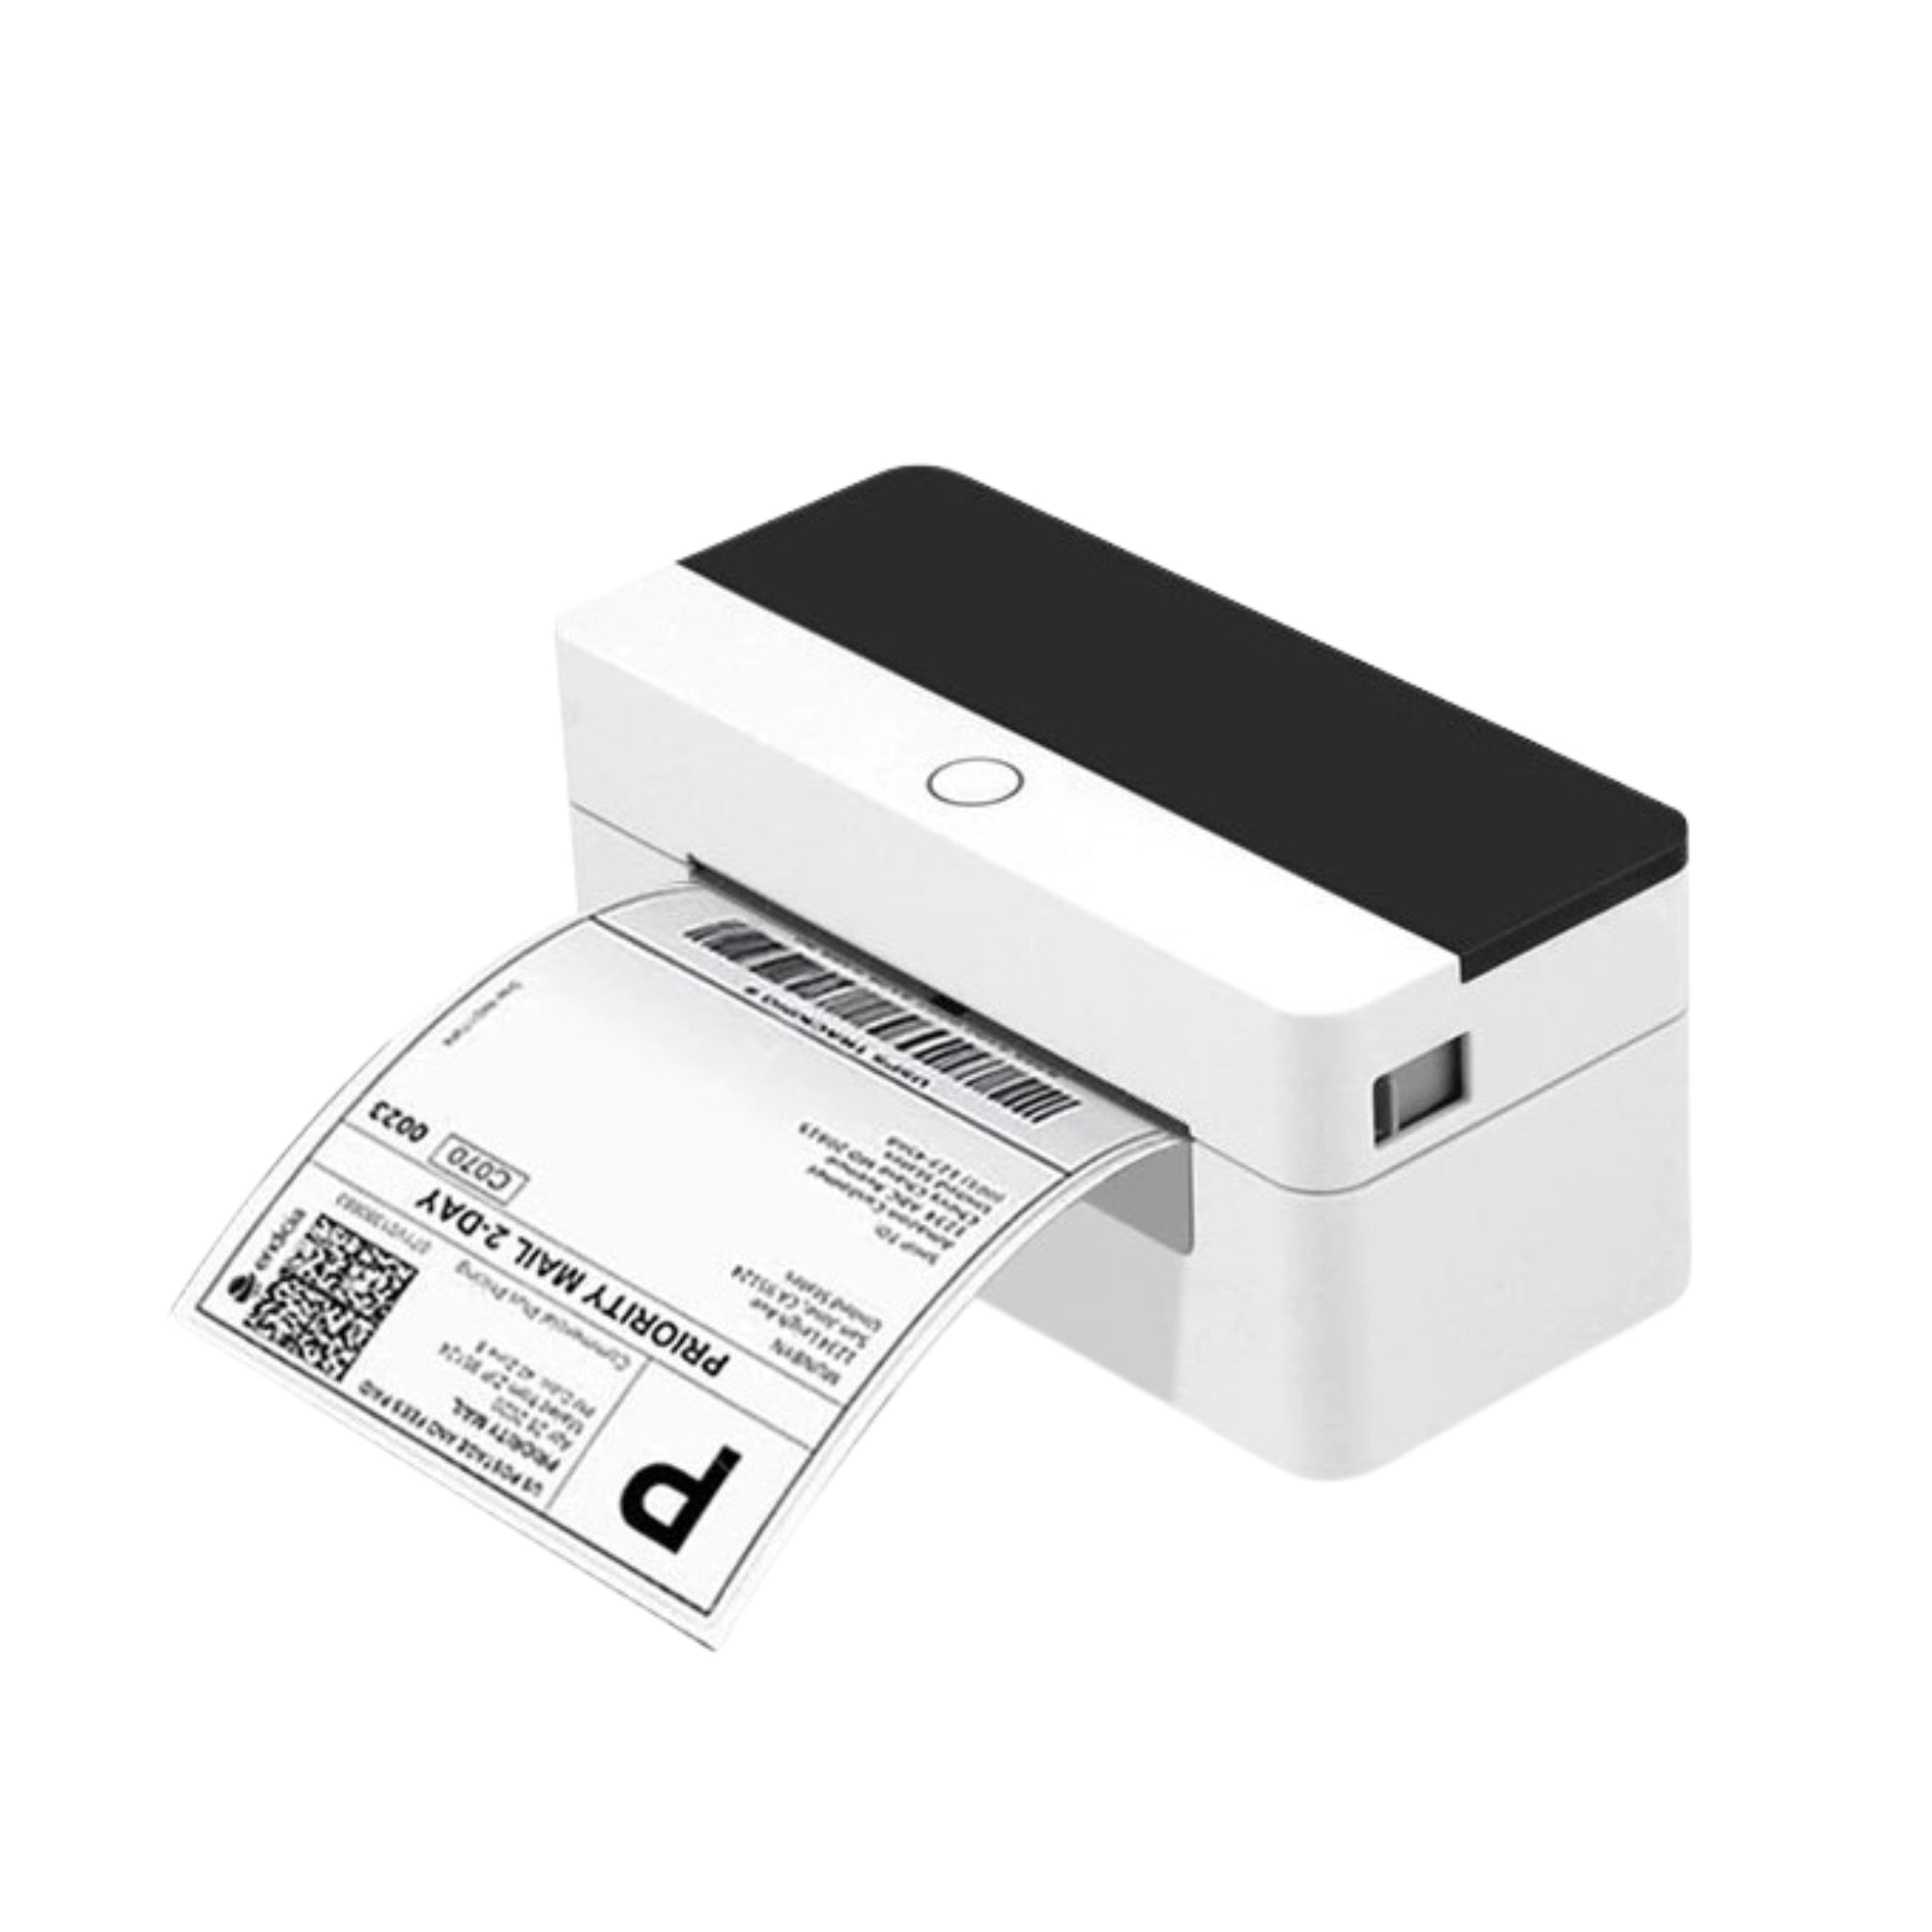 Thermal Label printers - Desktop Barcode Label Printer for Shipping Packages Home Small Business